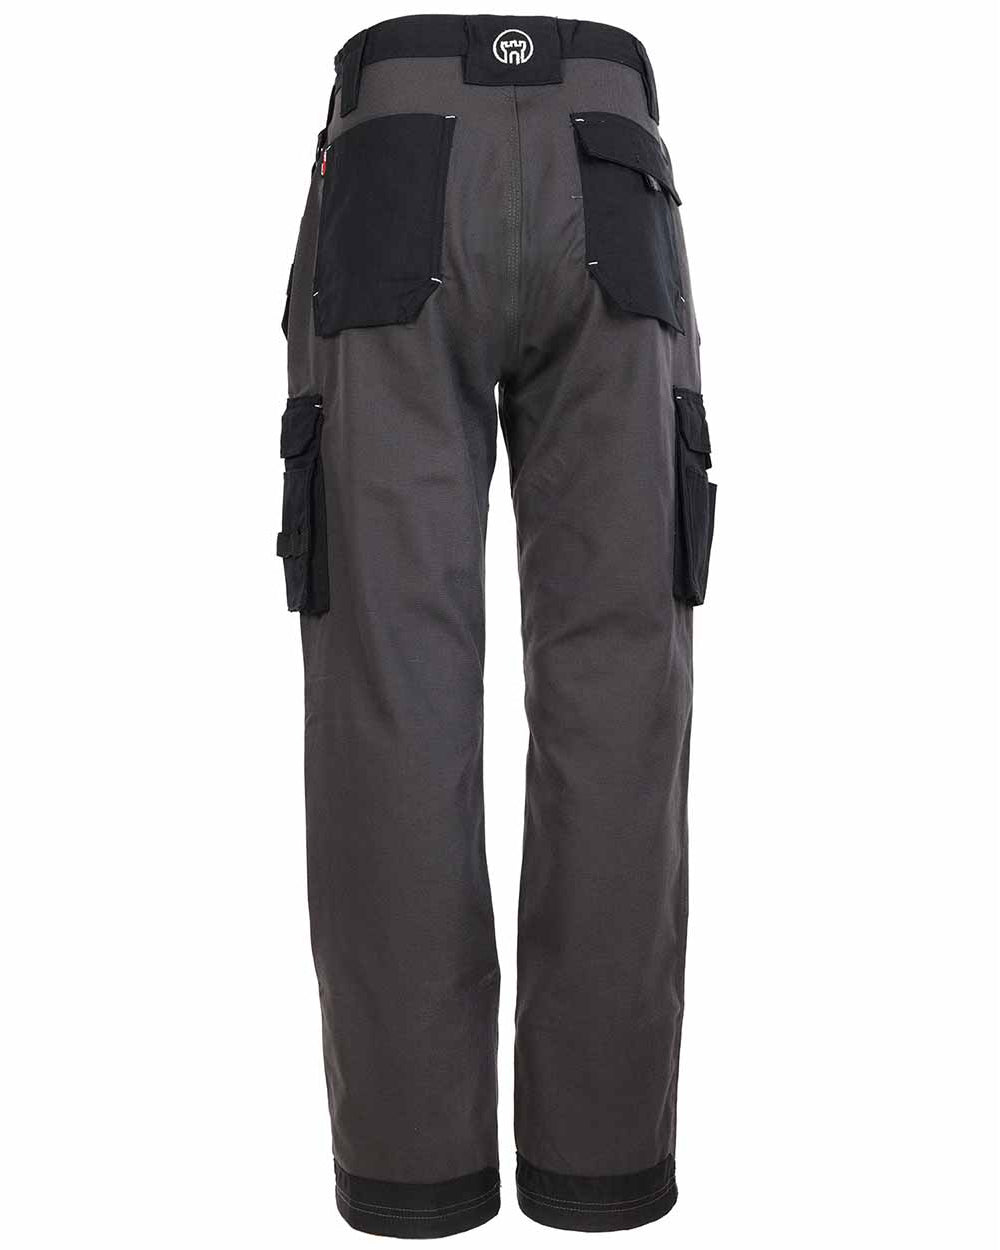 Grey Coloured TuffStuff Extreme Work Trousers On A White Background 